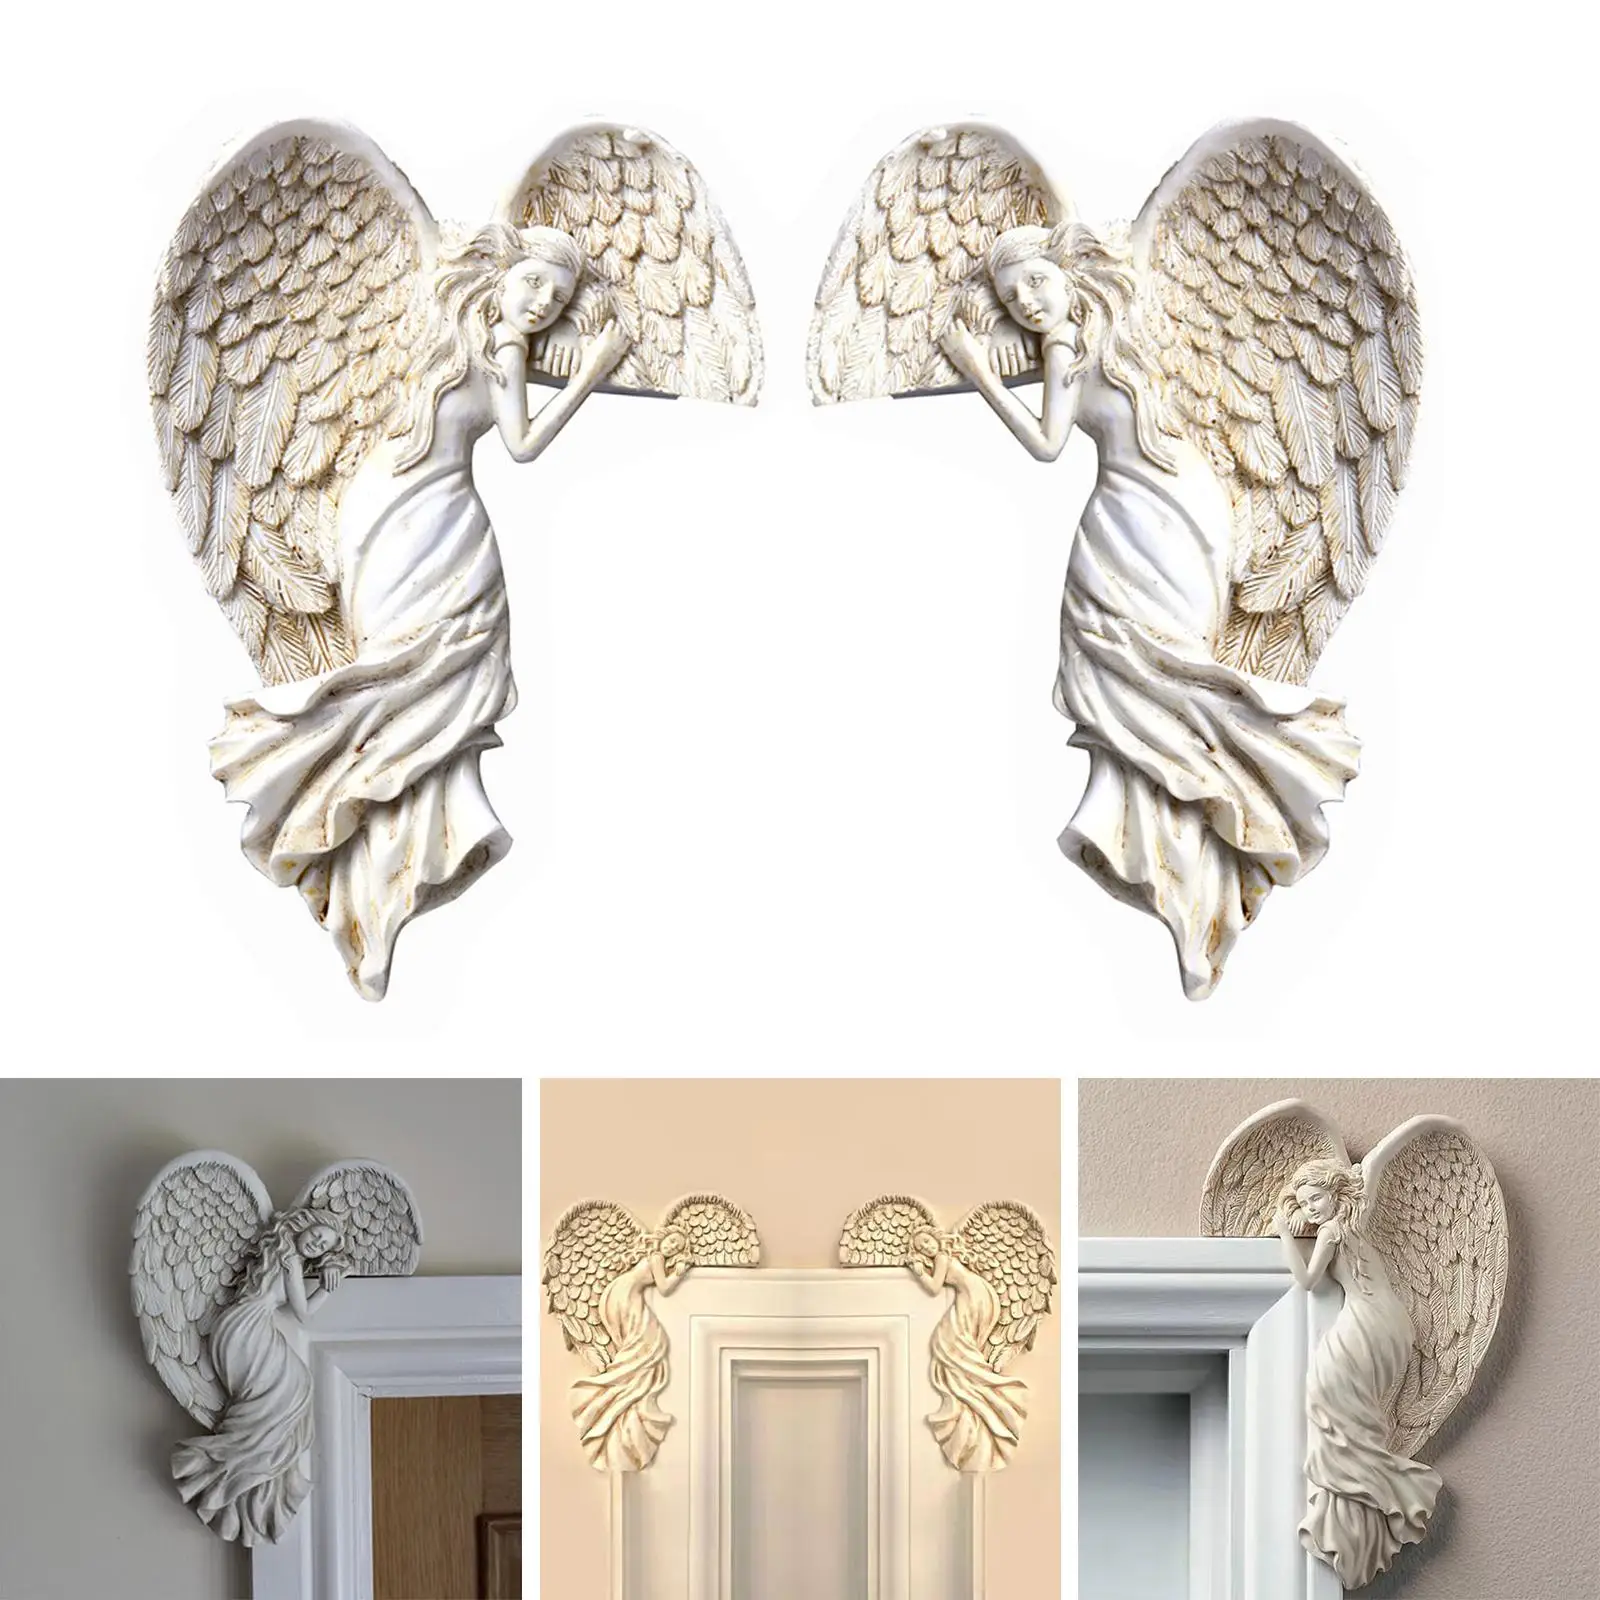 Angel Wall Decoration, Antique Hanging Resin Angel Wings, Wall Art Décor Sculpture for Home Bedroom Living Room Garden Fairy